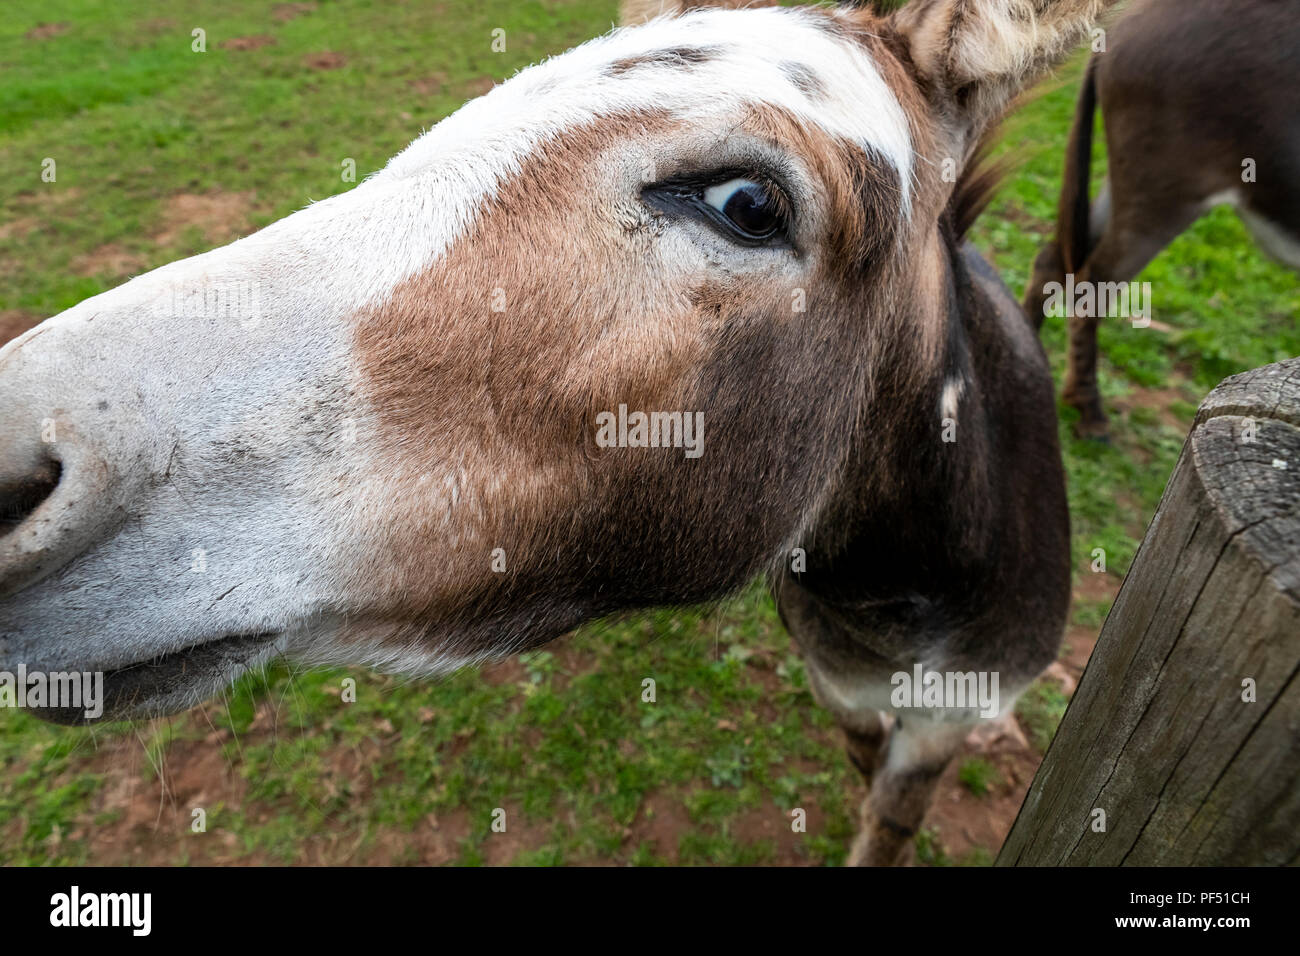 A farmyard donkey looking over a paddock fence, Monmouthshire UK. Stock Photo